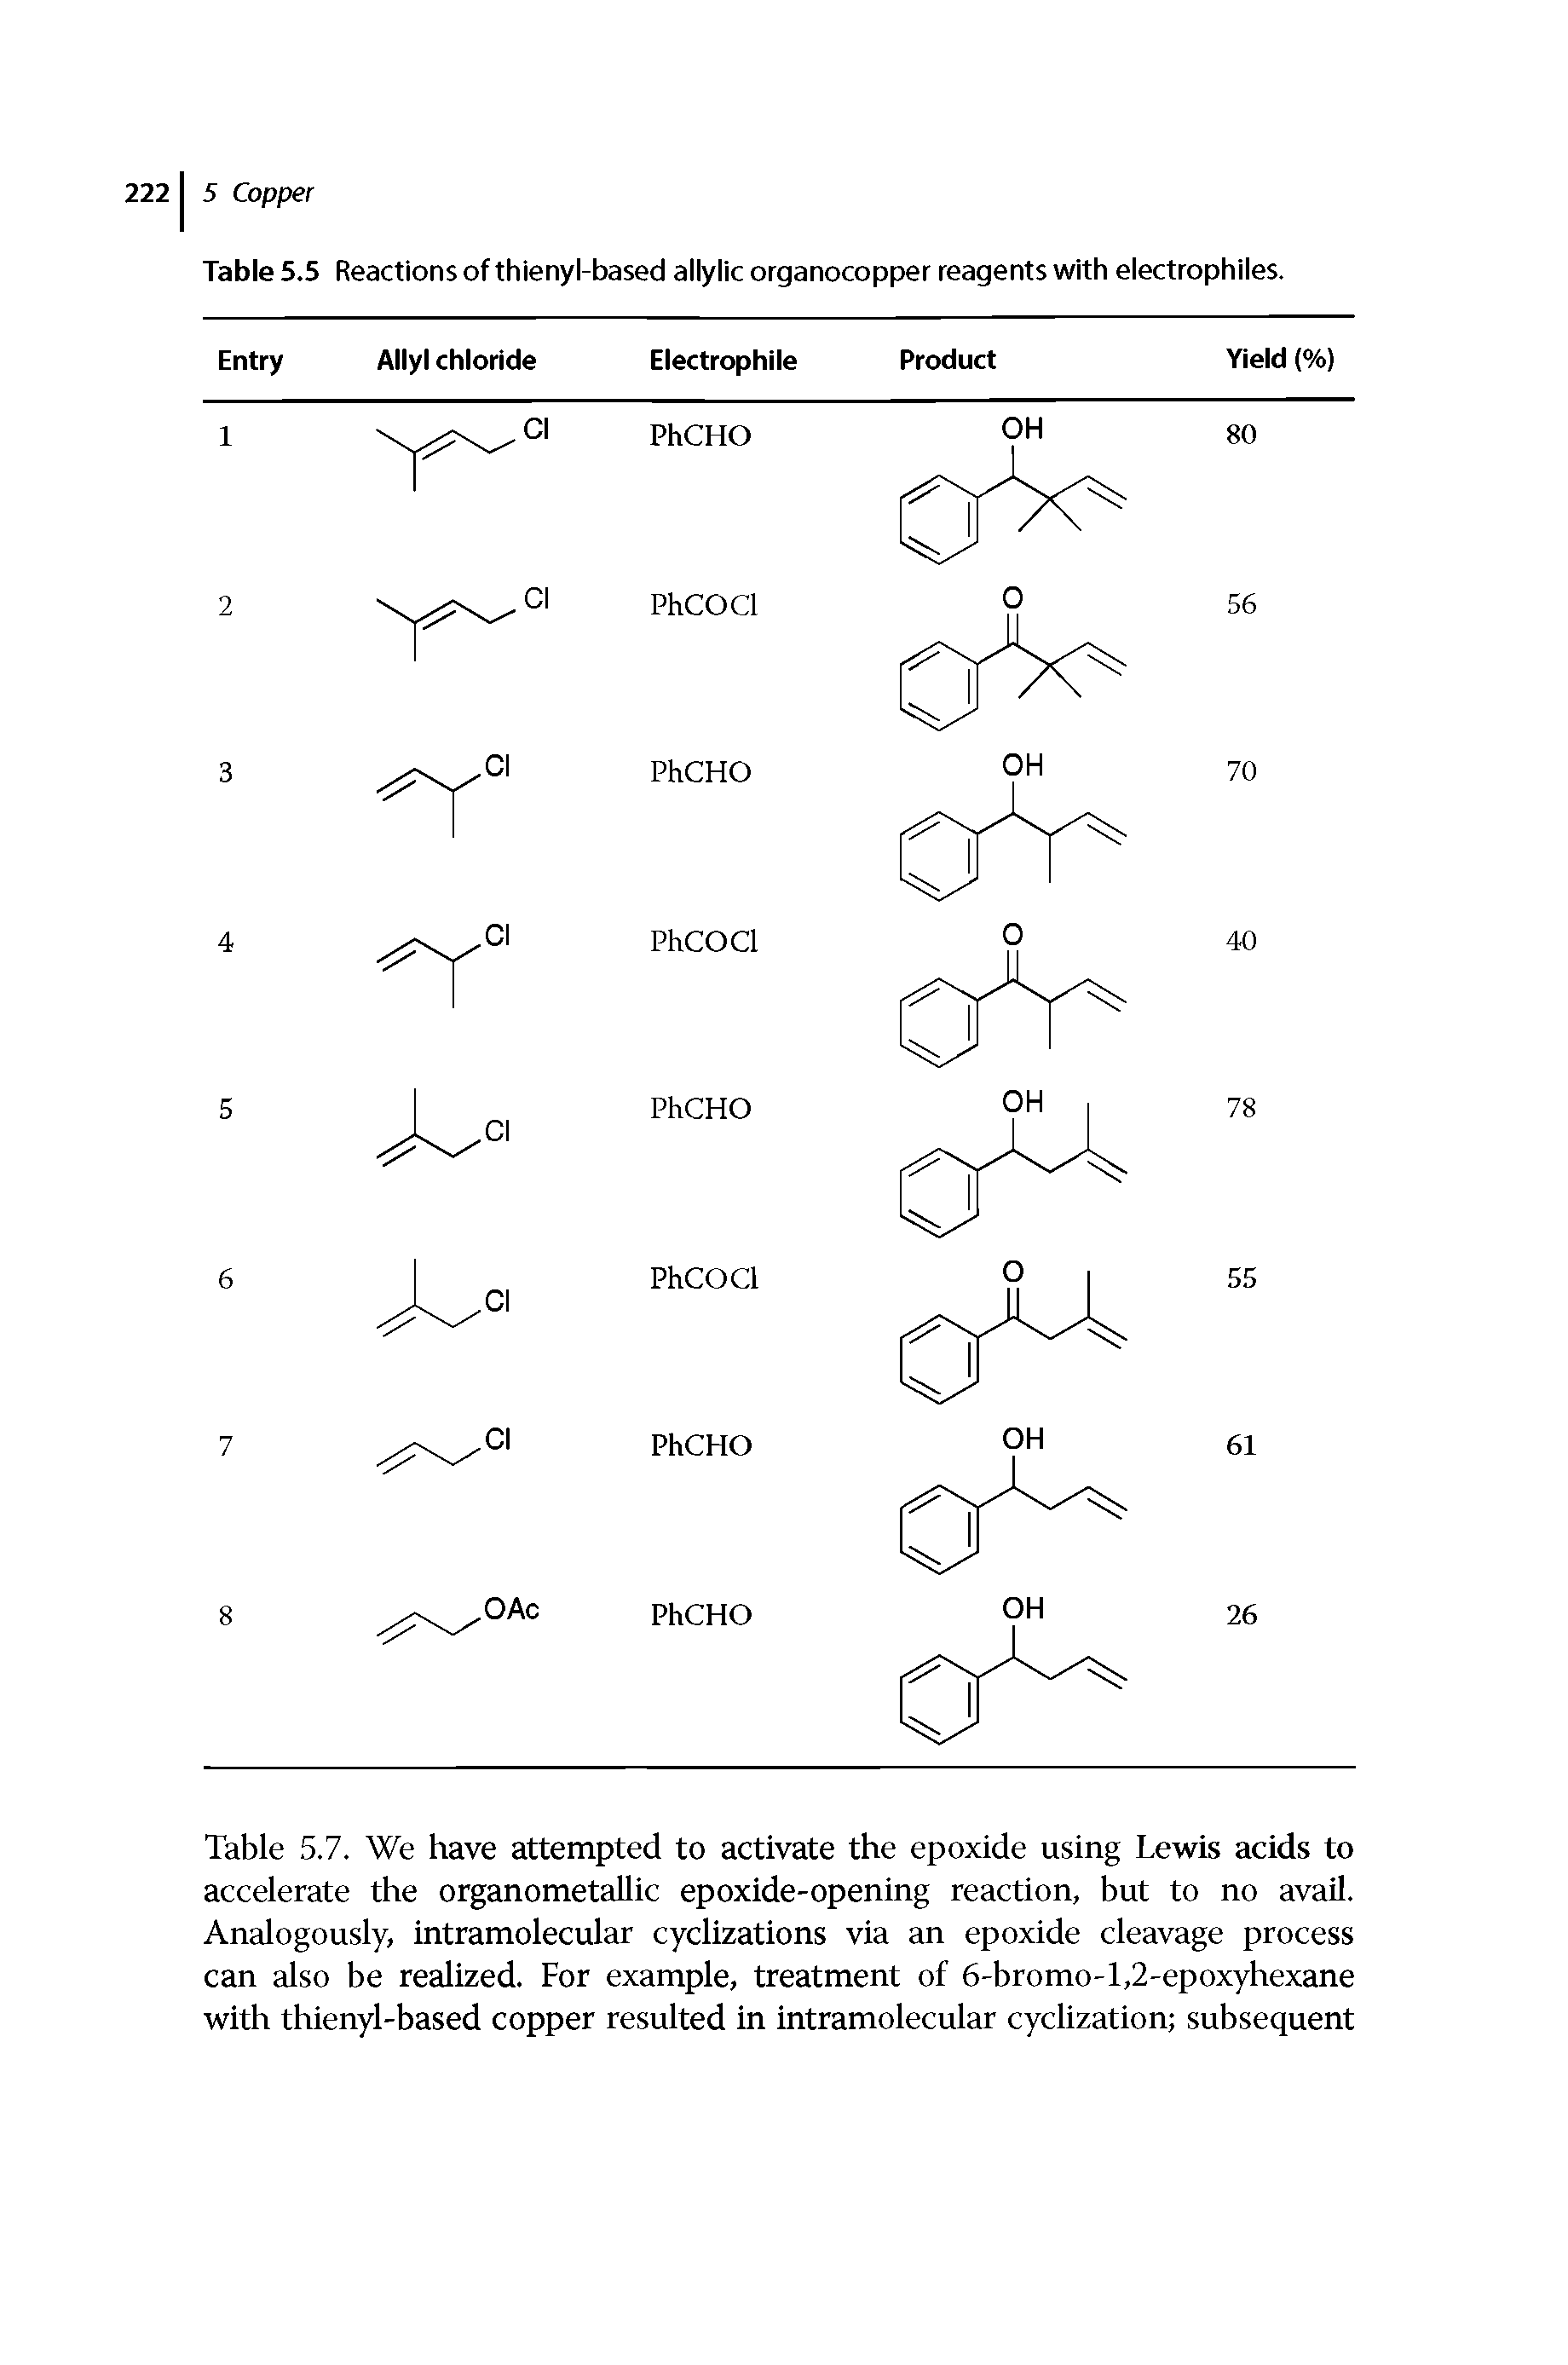 Table 5.5 Reactions of thienyl-based allylic organocopper reagents with electrophiles.